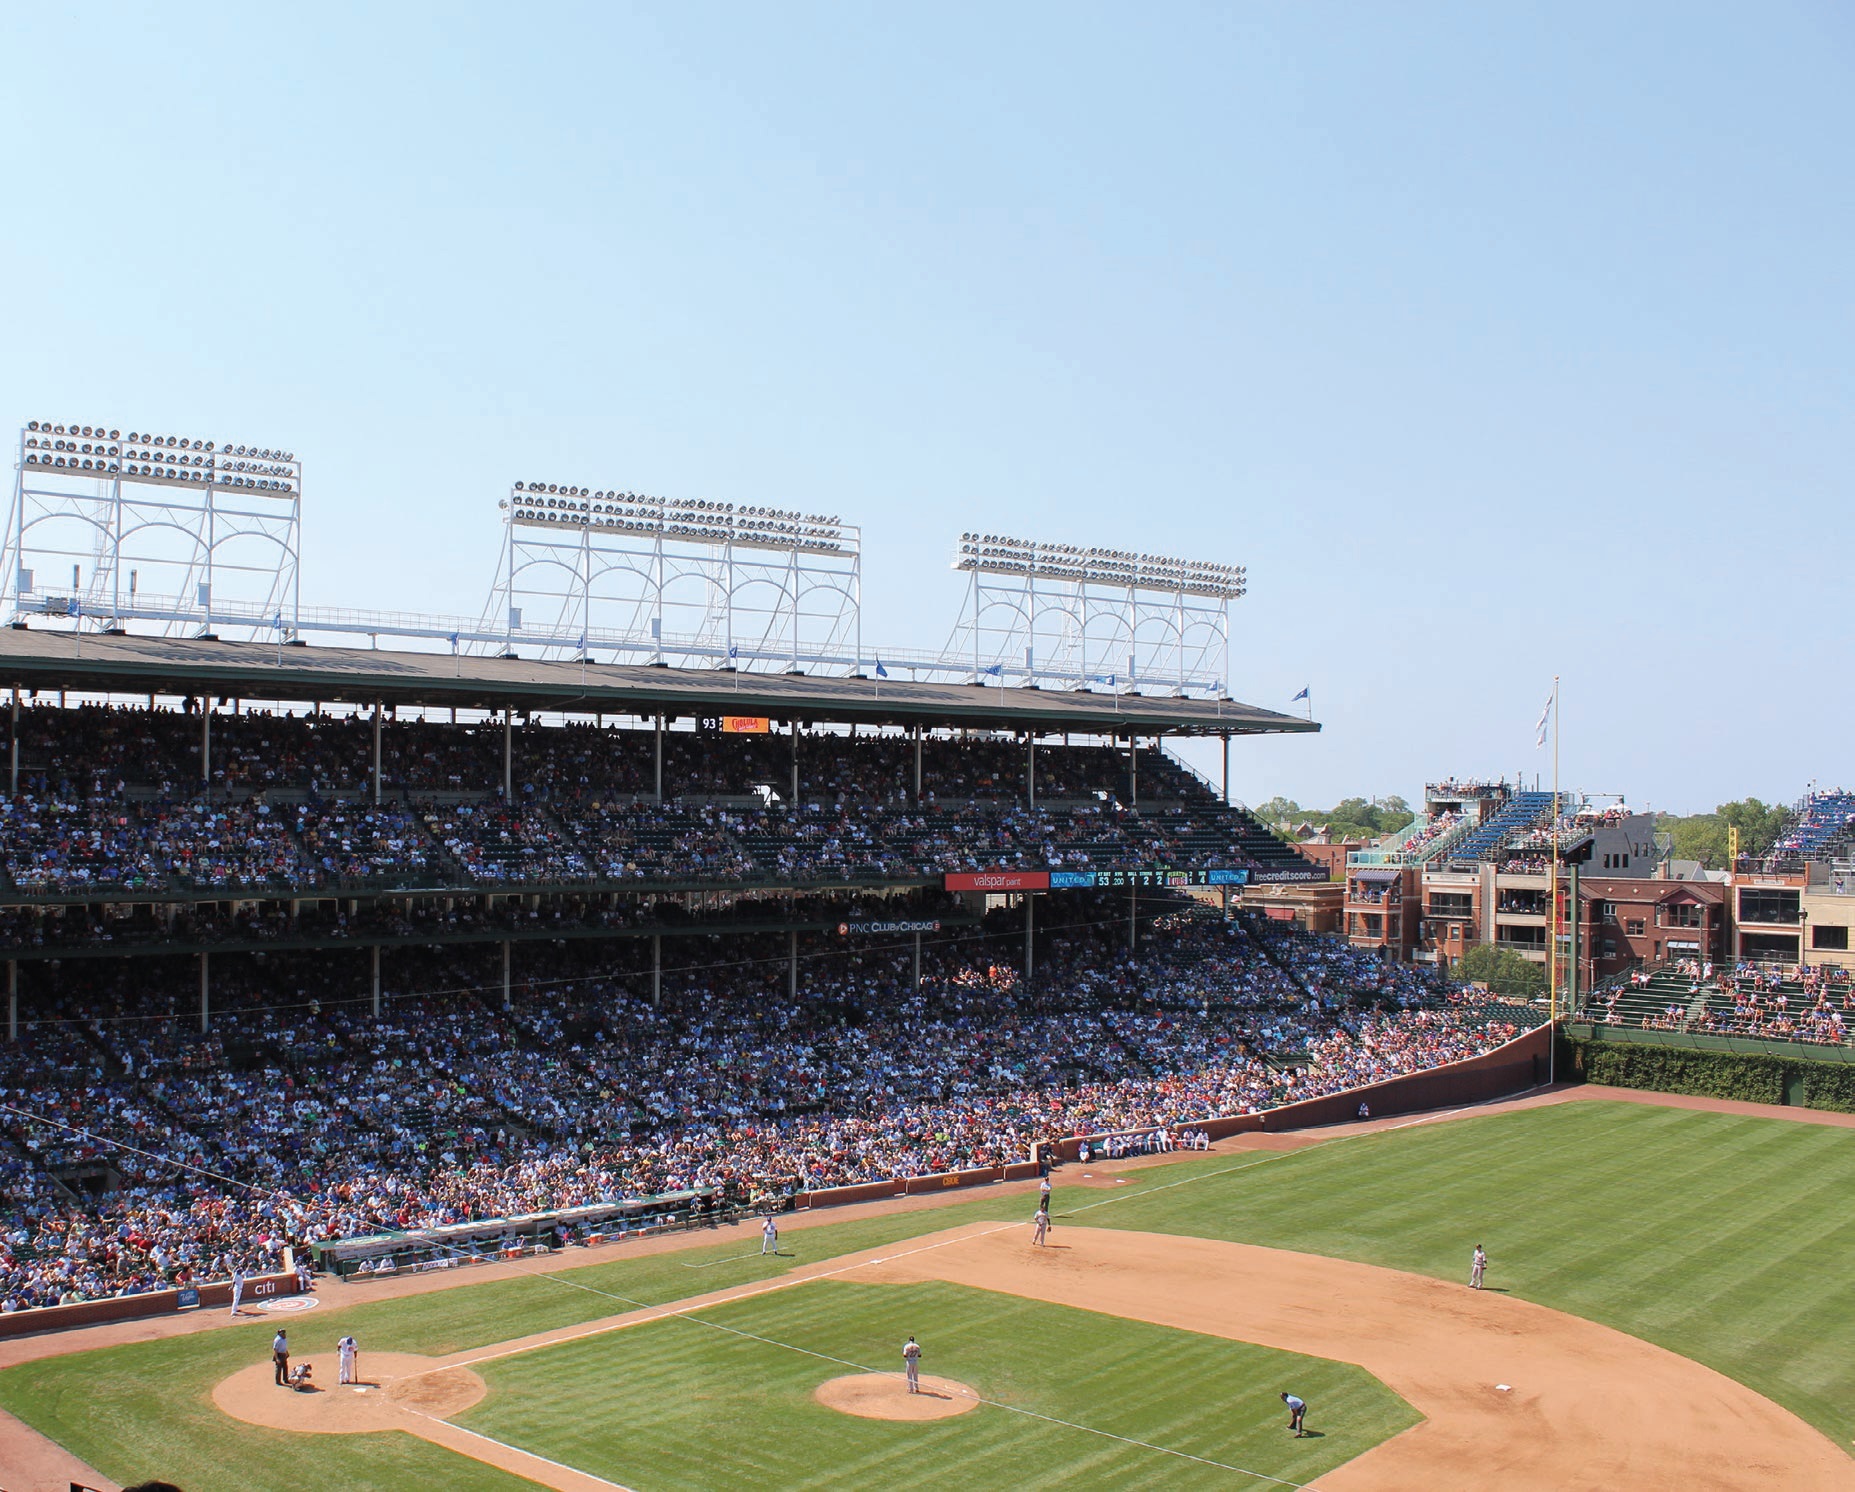 In the heart of Lakeview, Wrigley Field is one of the most beloved and historic ballparks in all of baseball. PHOTO BY TONYTHETIGER ON CC BY-SA 3.0